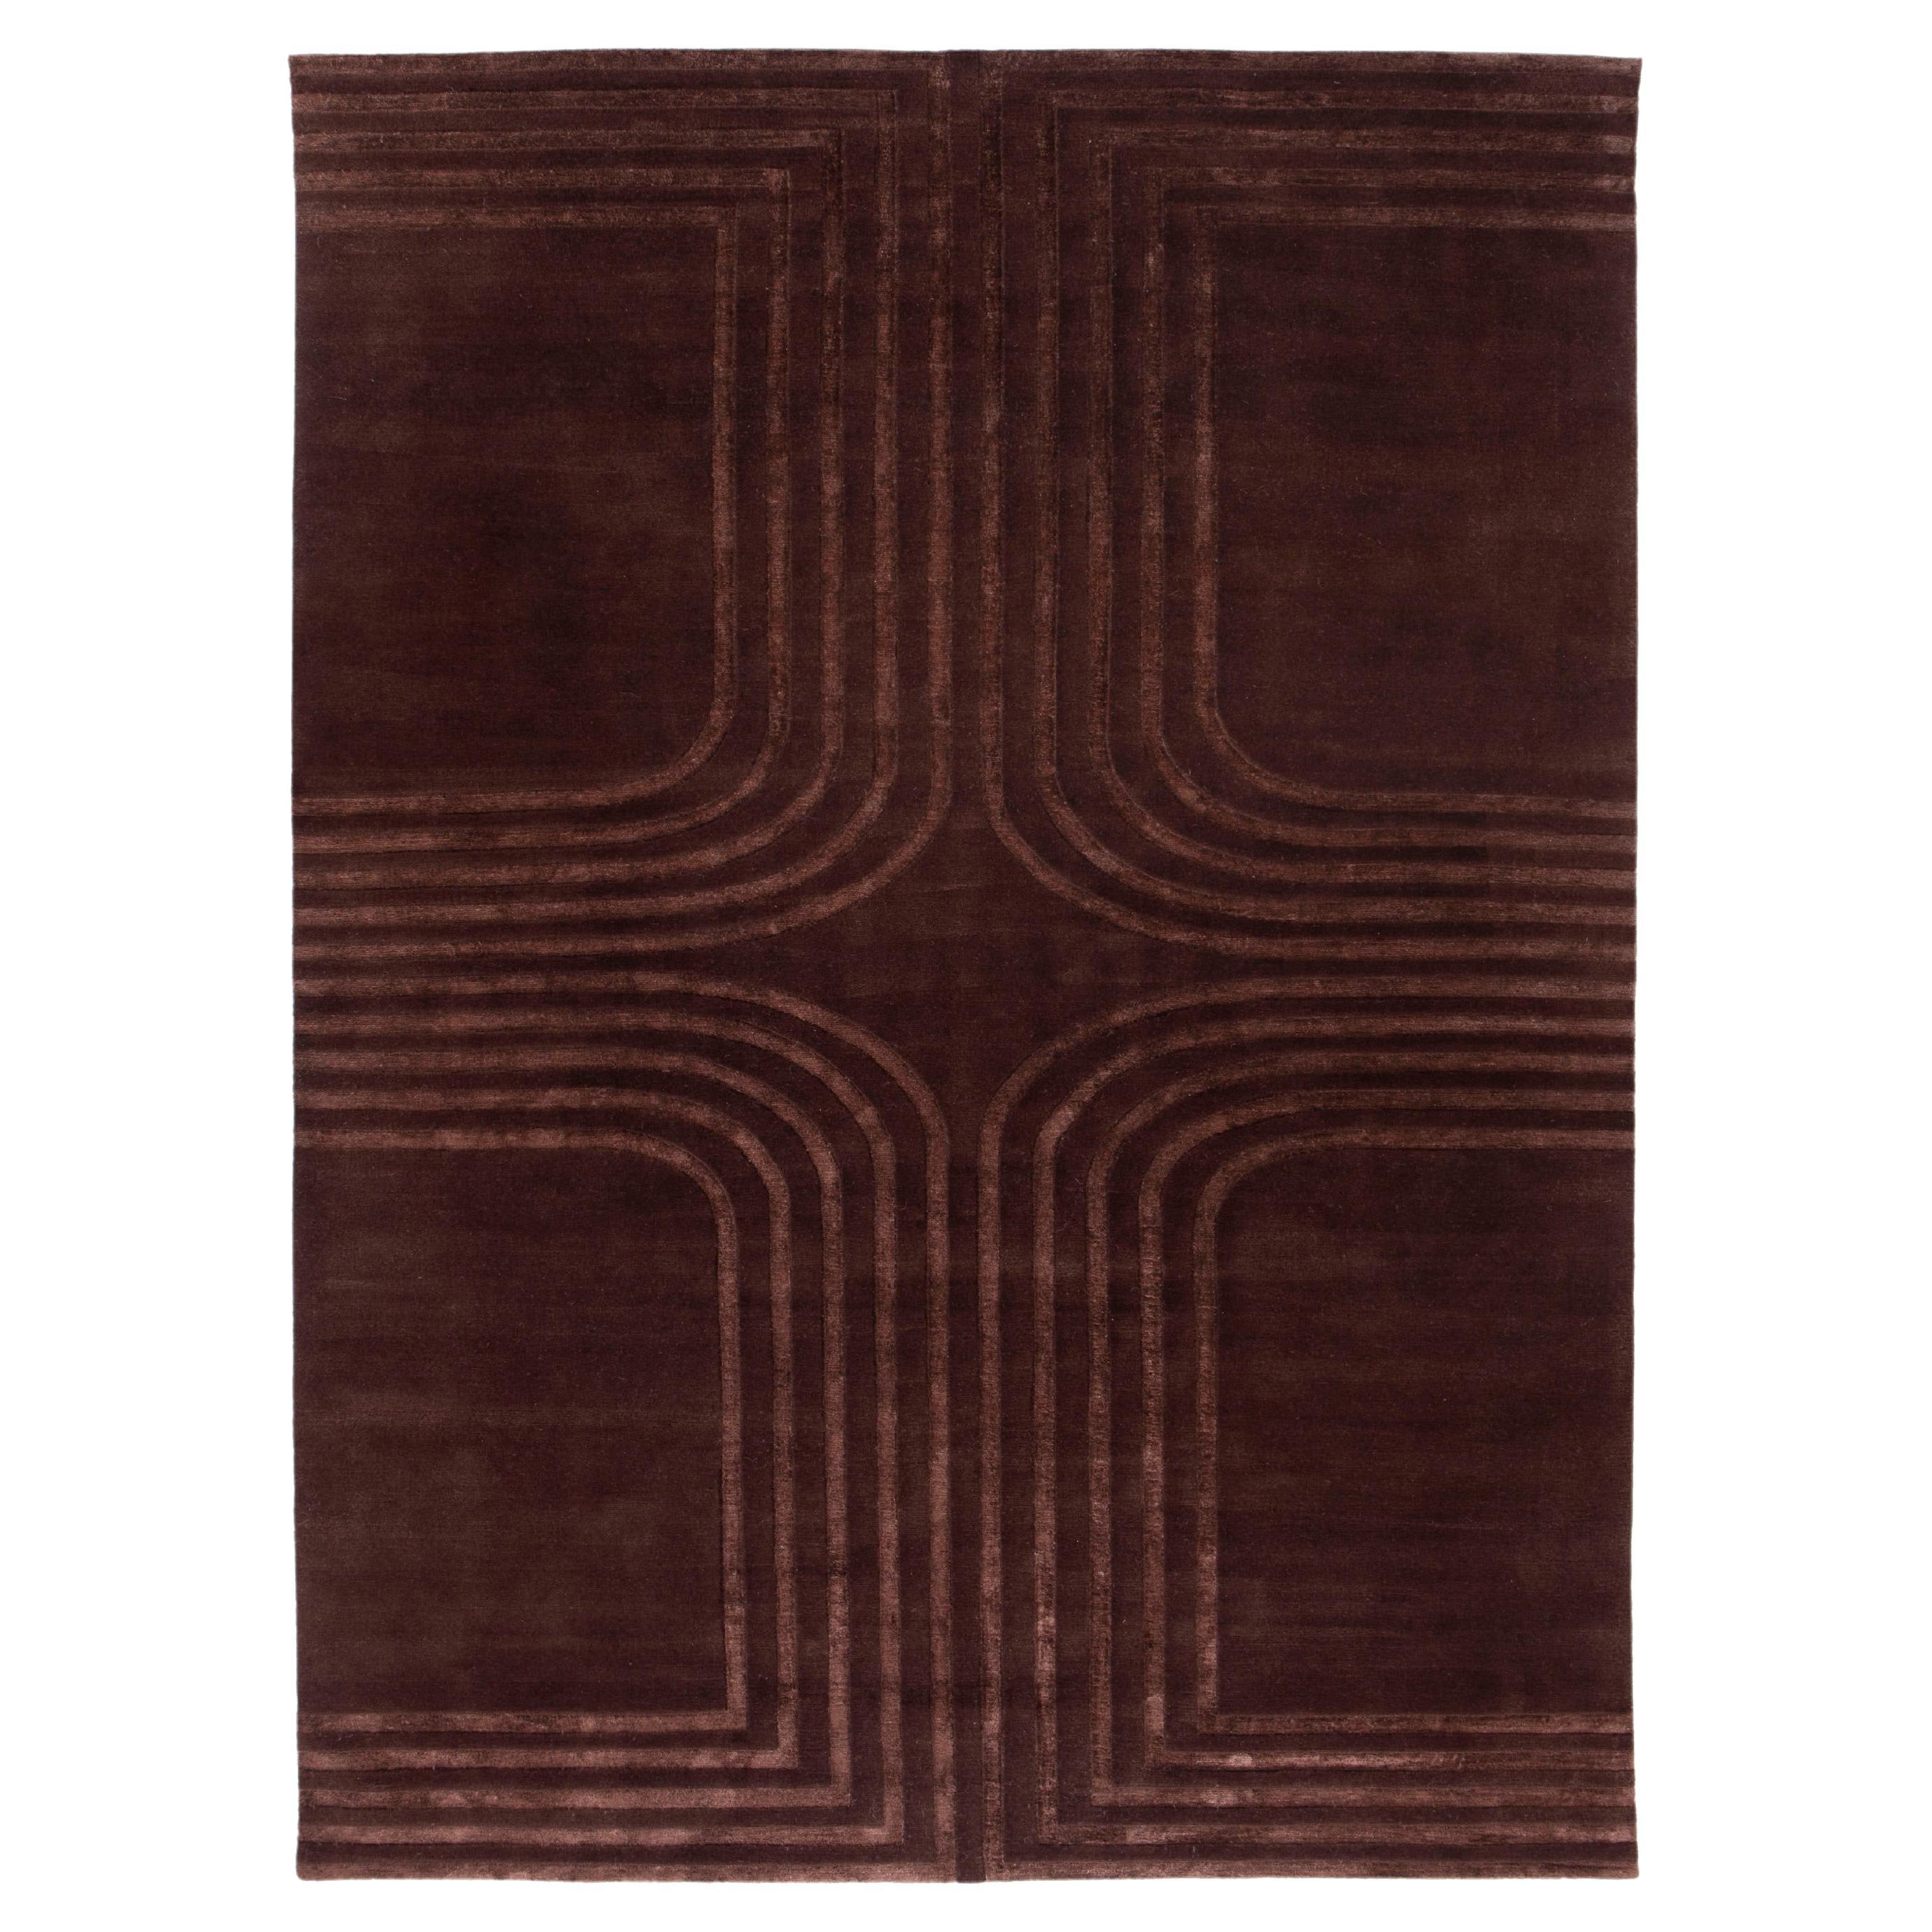 Handknotted wool rug Rilievo 01 by TIGMI
Dimensions: 300 x 220 
Materials: Wool, Linen
Available in different colors.

Tigmi Trading are a certified GoodWeave partner, a non-profit organization that works to end child labour in the rug industry